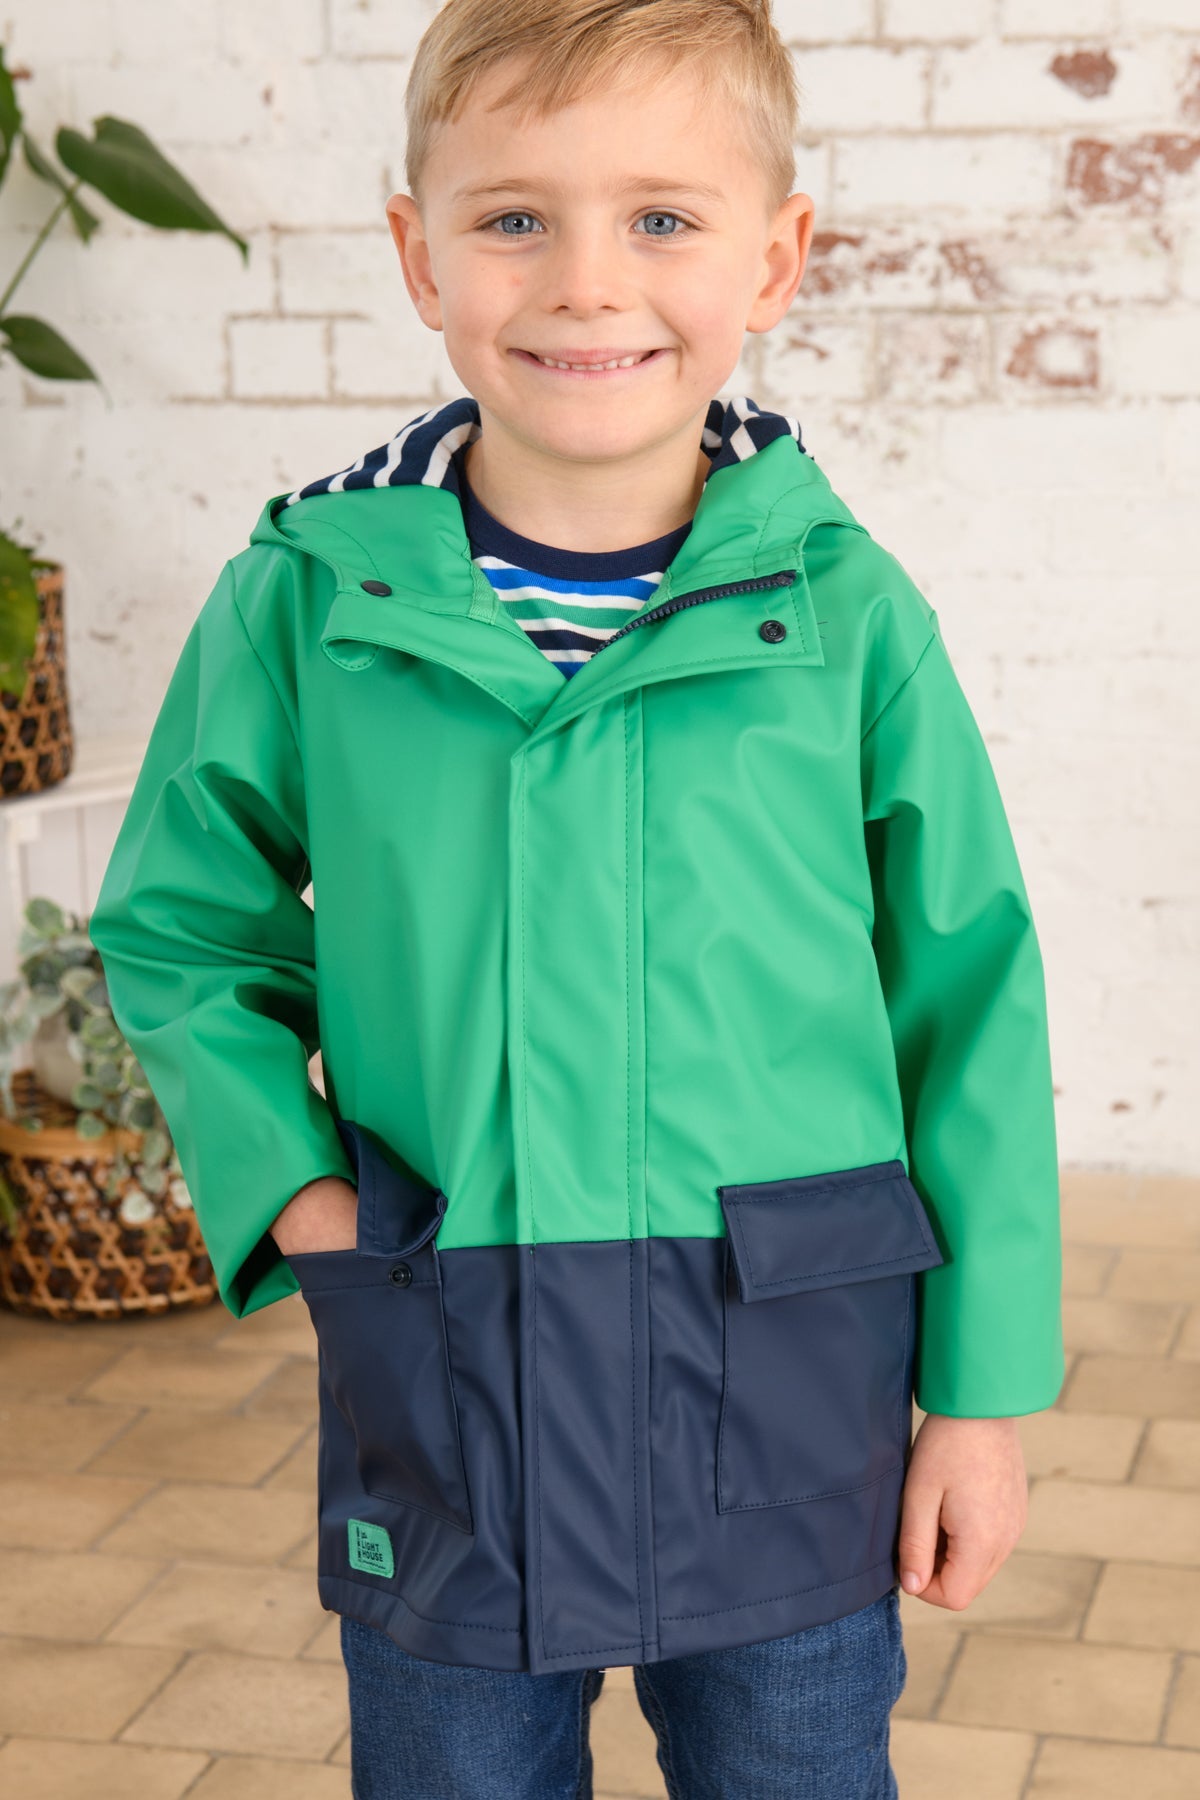 Anchor Jacket - Peagreen Navy - Lighthouse